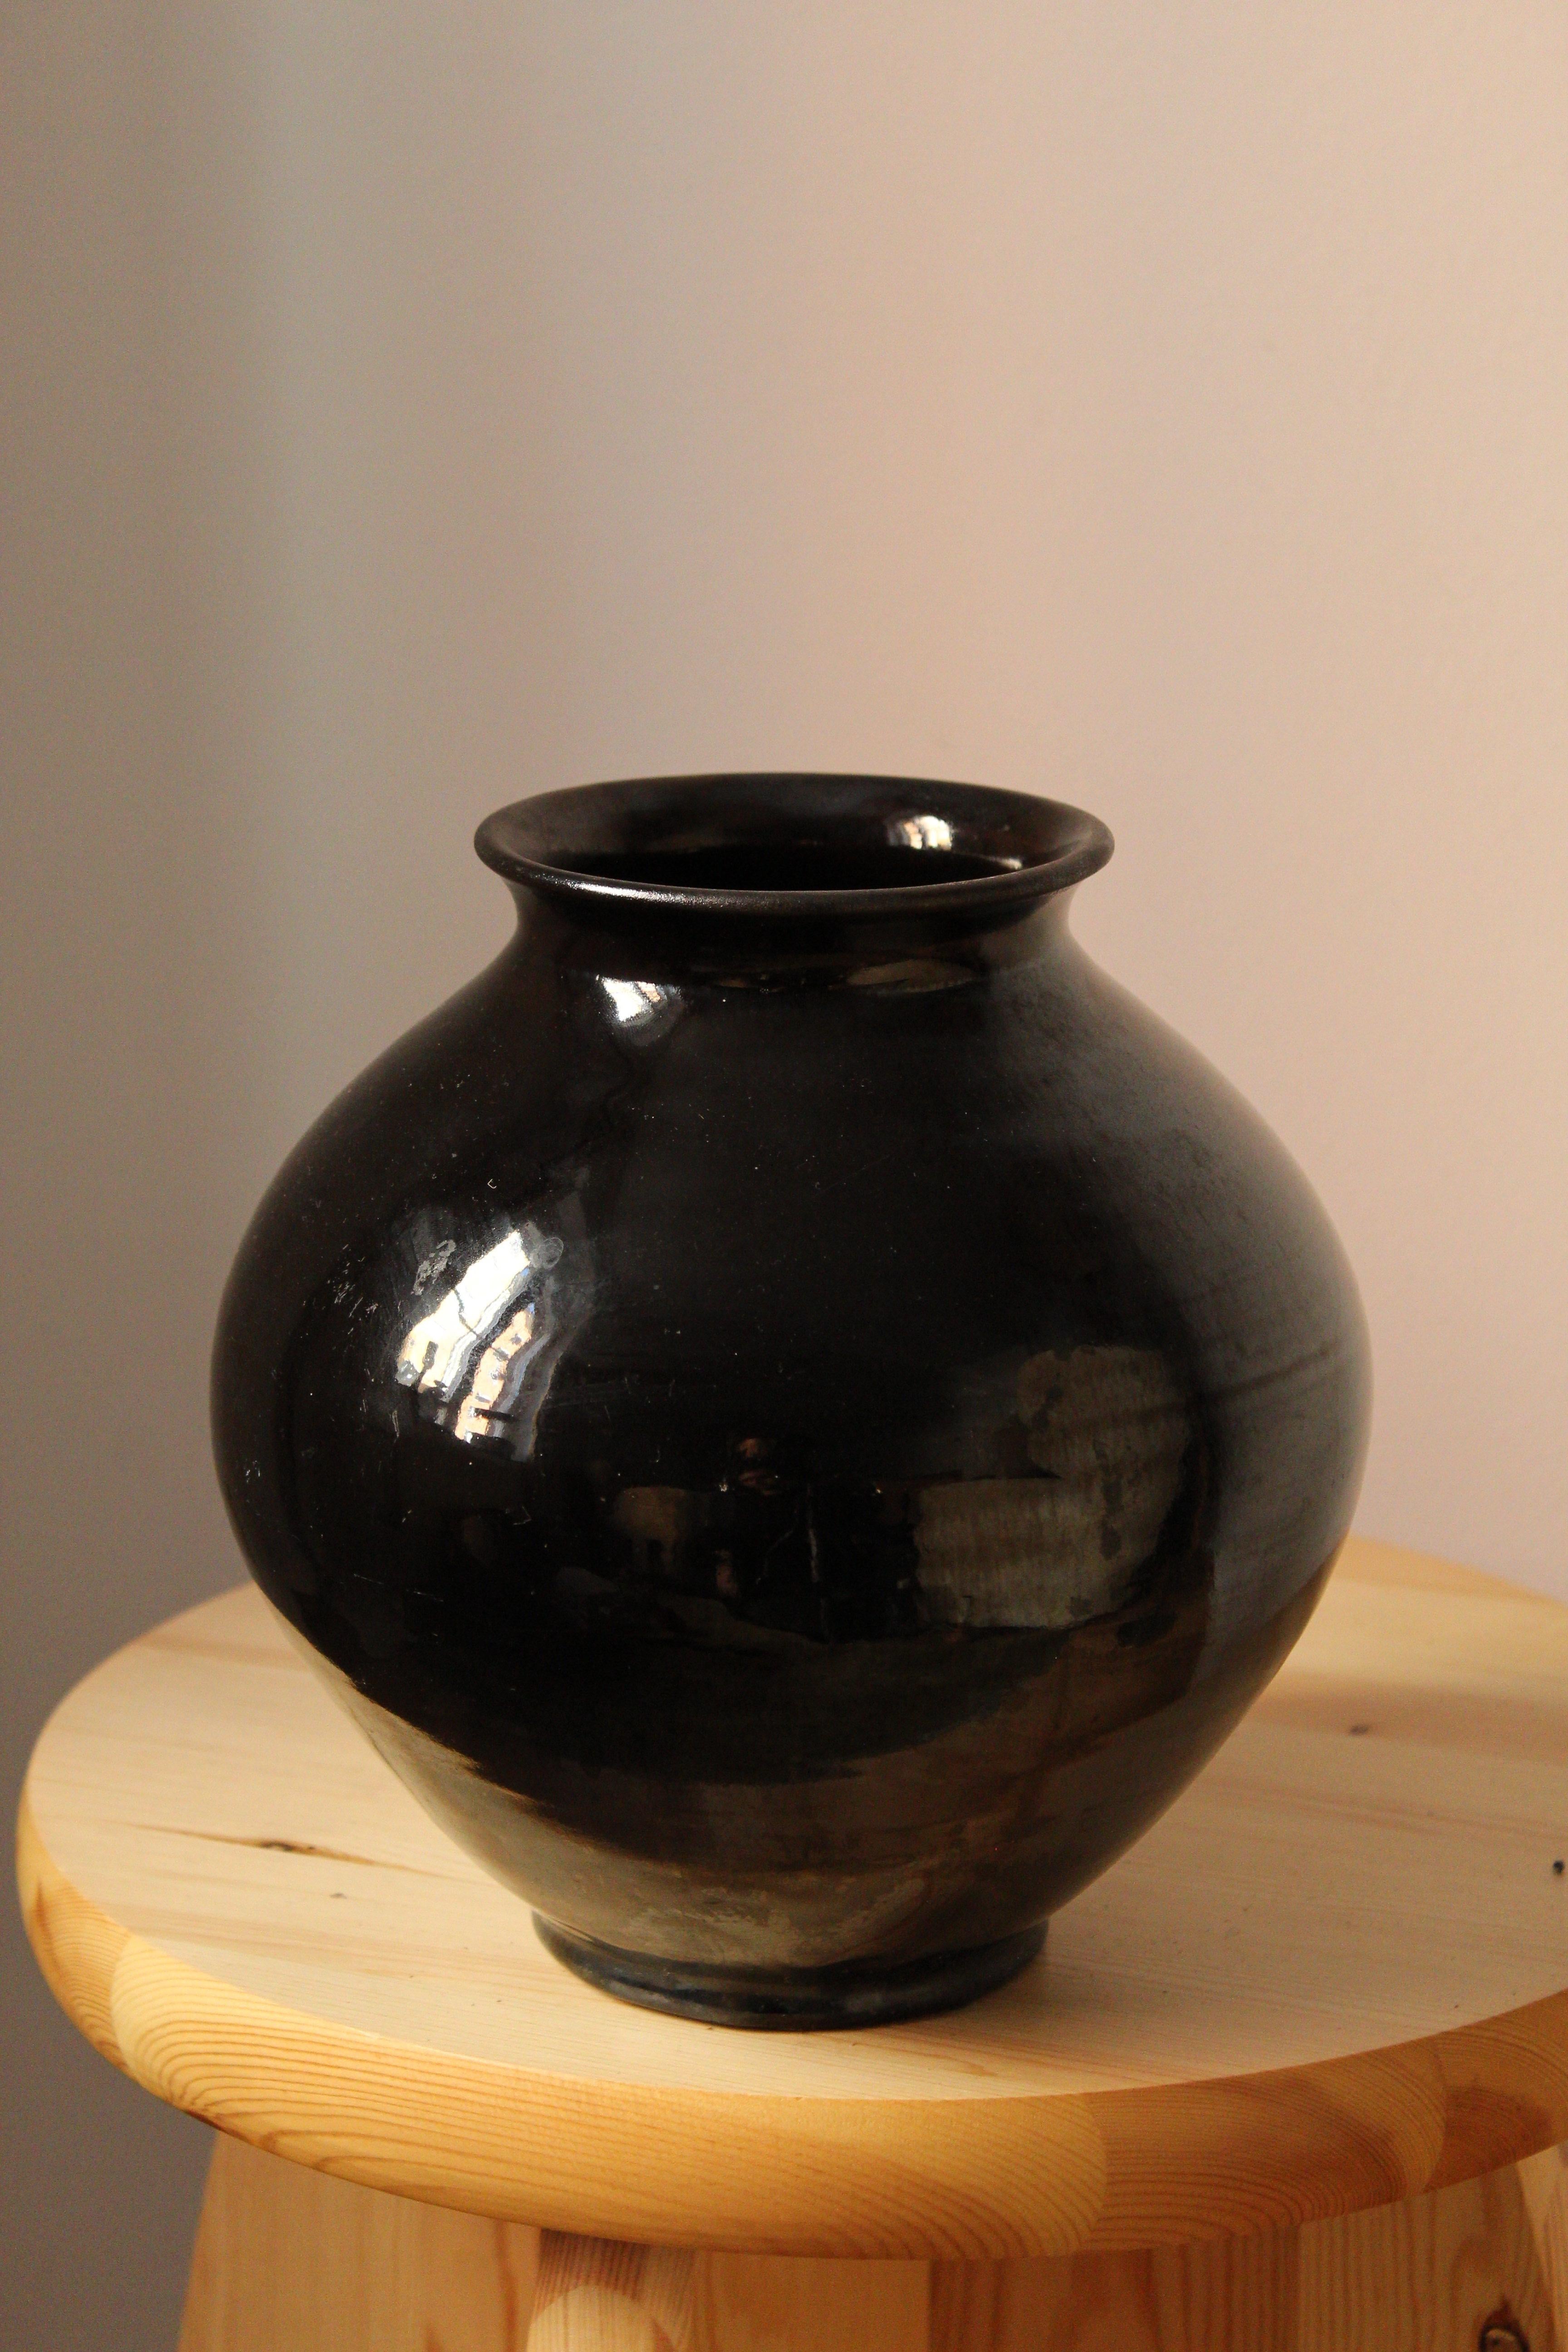 A sizable vase. Designed and produced by Herman Kähler. Signed HAK. 

As is Kählers signature, the clay was sourced on the island of Bornholm. On this vase, a black glaze has been applied.

Kähler is an important ceramicist known for his modern